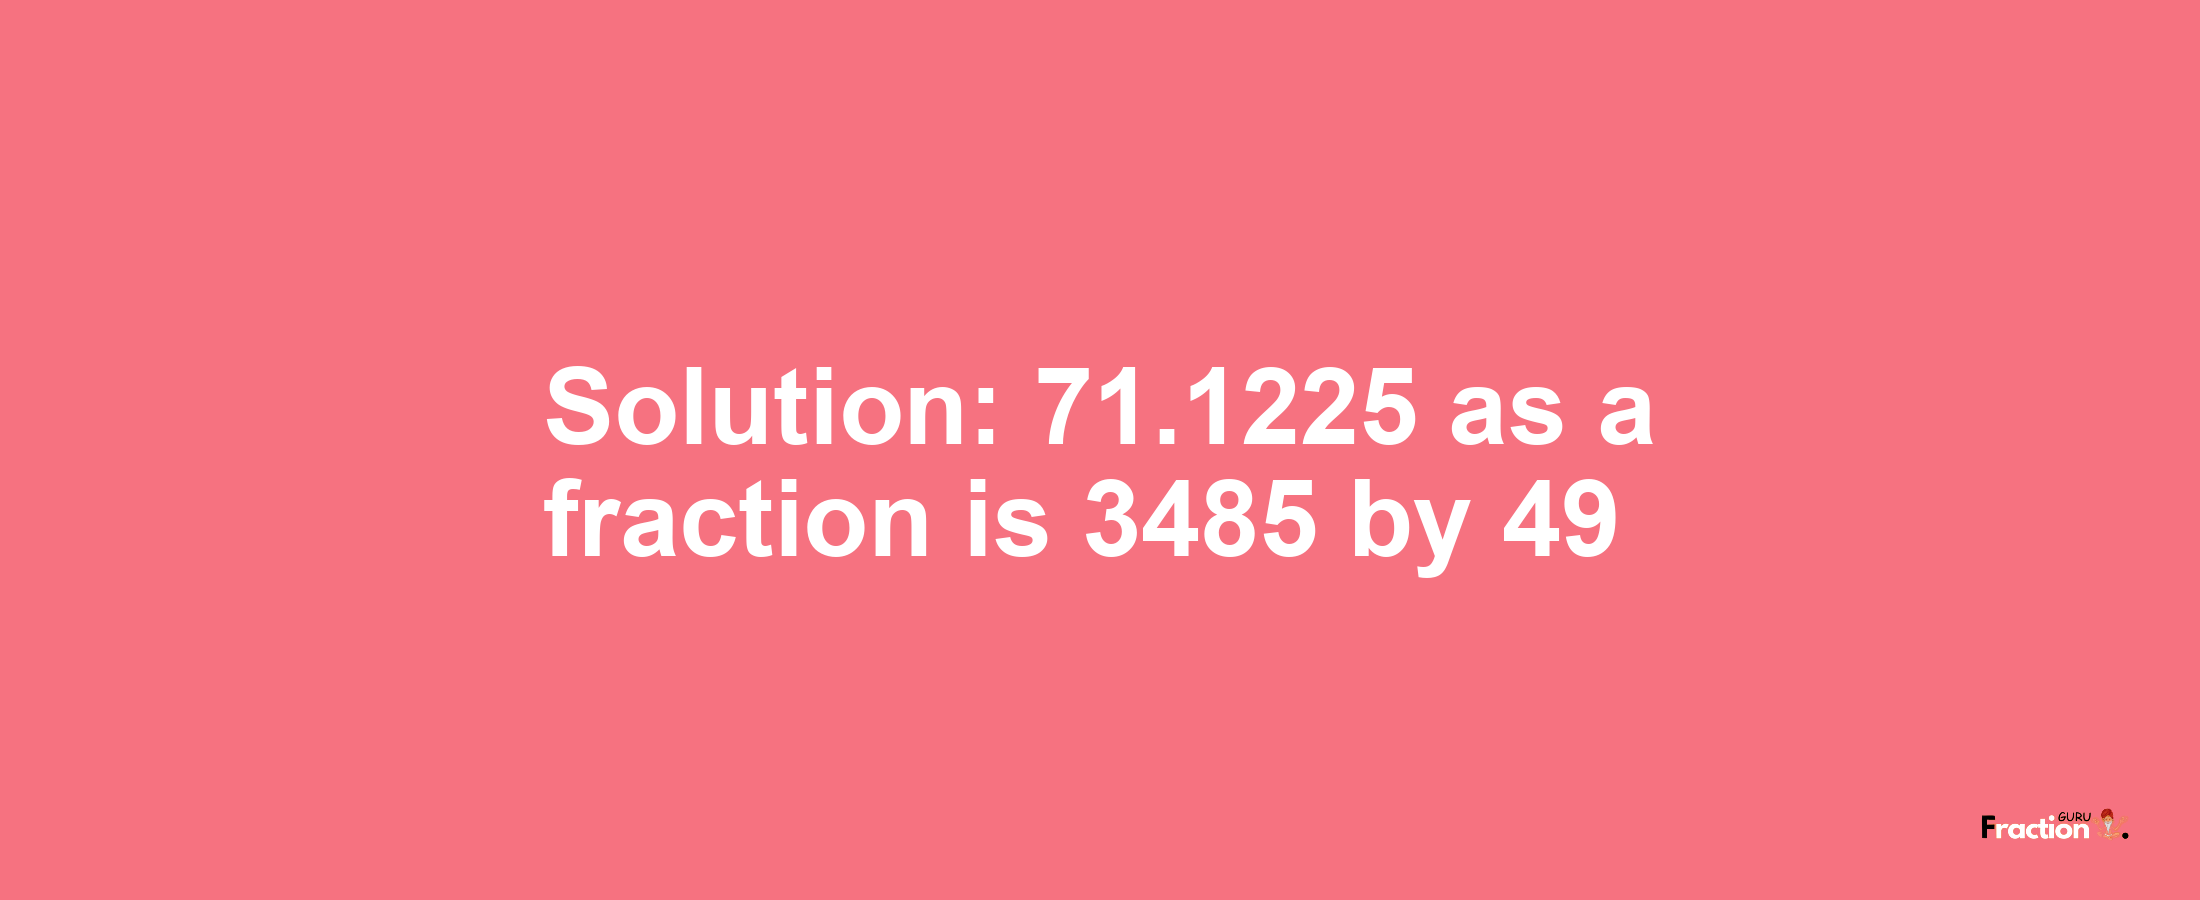 Solution:71.1225 as a fraction is 3485/49